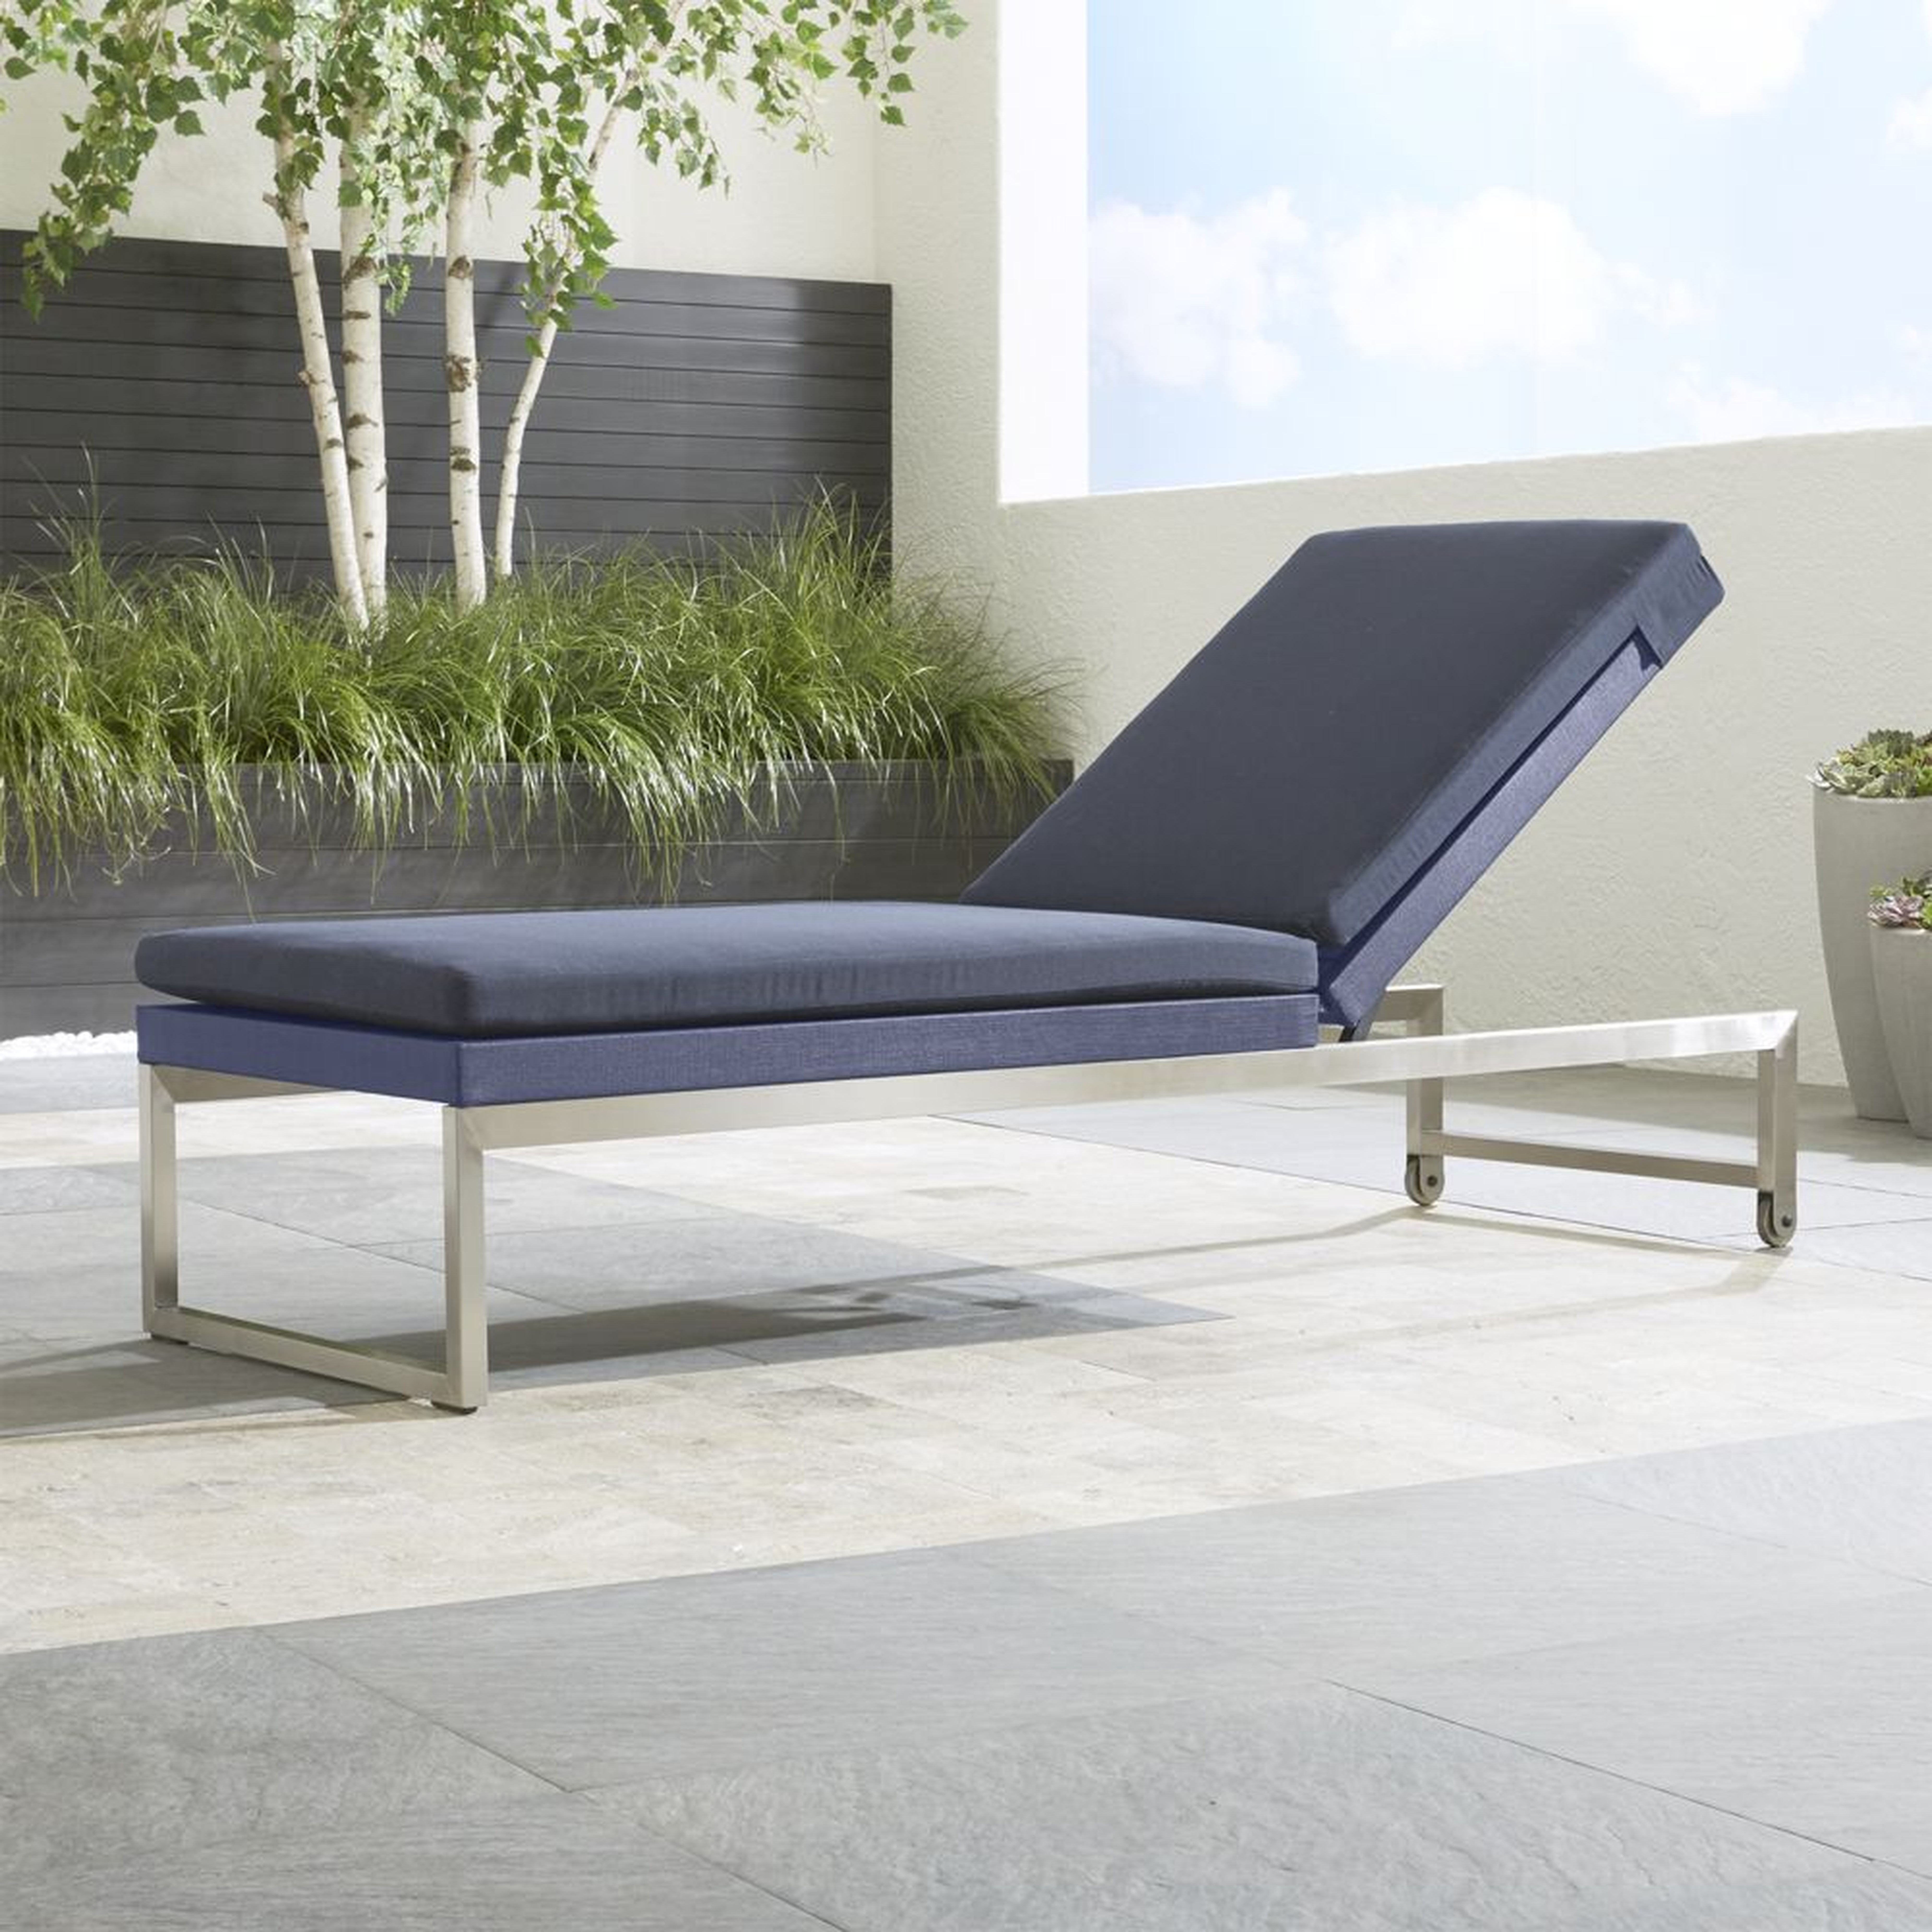 Dune Navy Outdoor Chaise Lounge with Sunbrella ® Cushion - Crate and Barrel